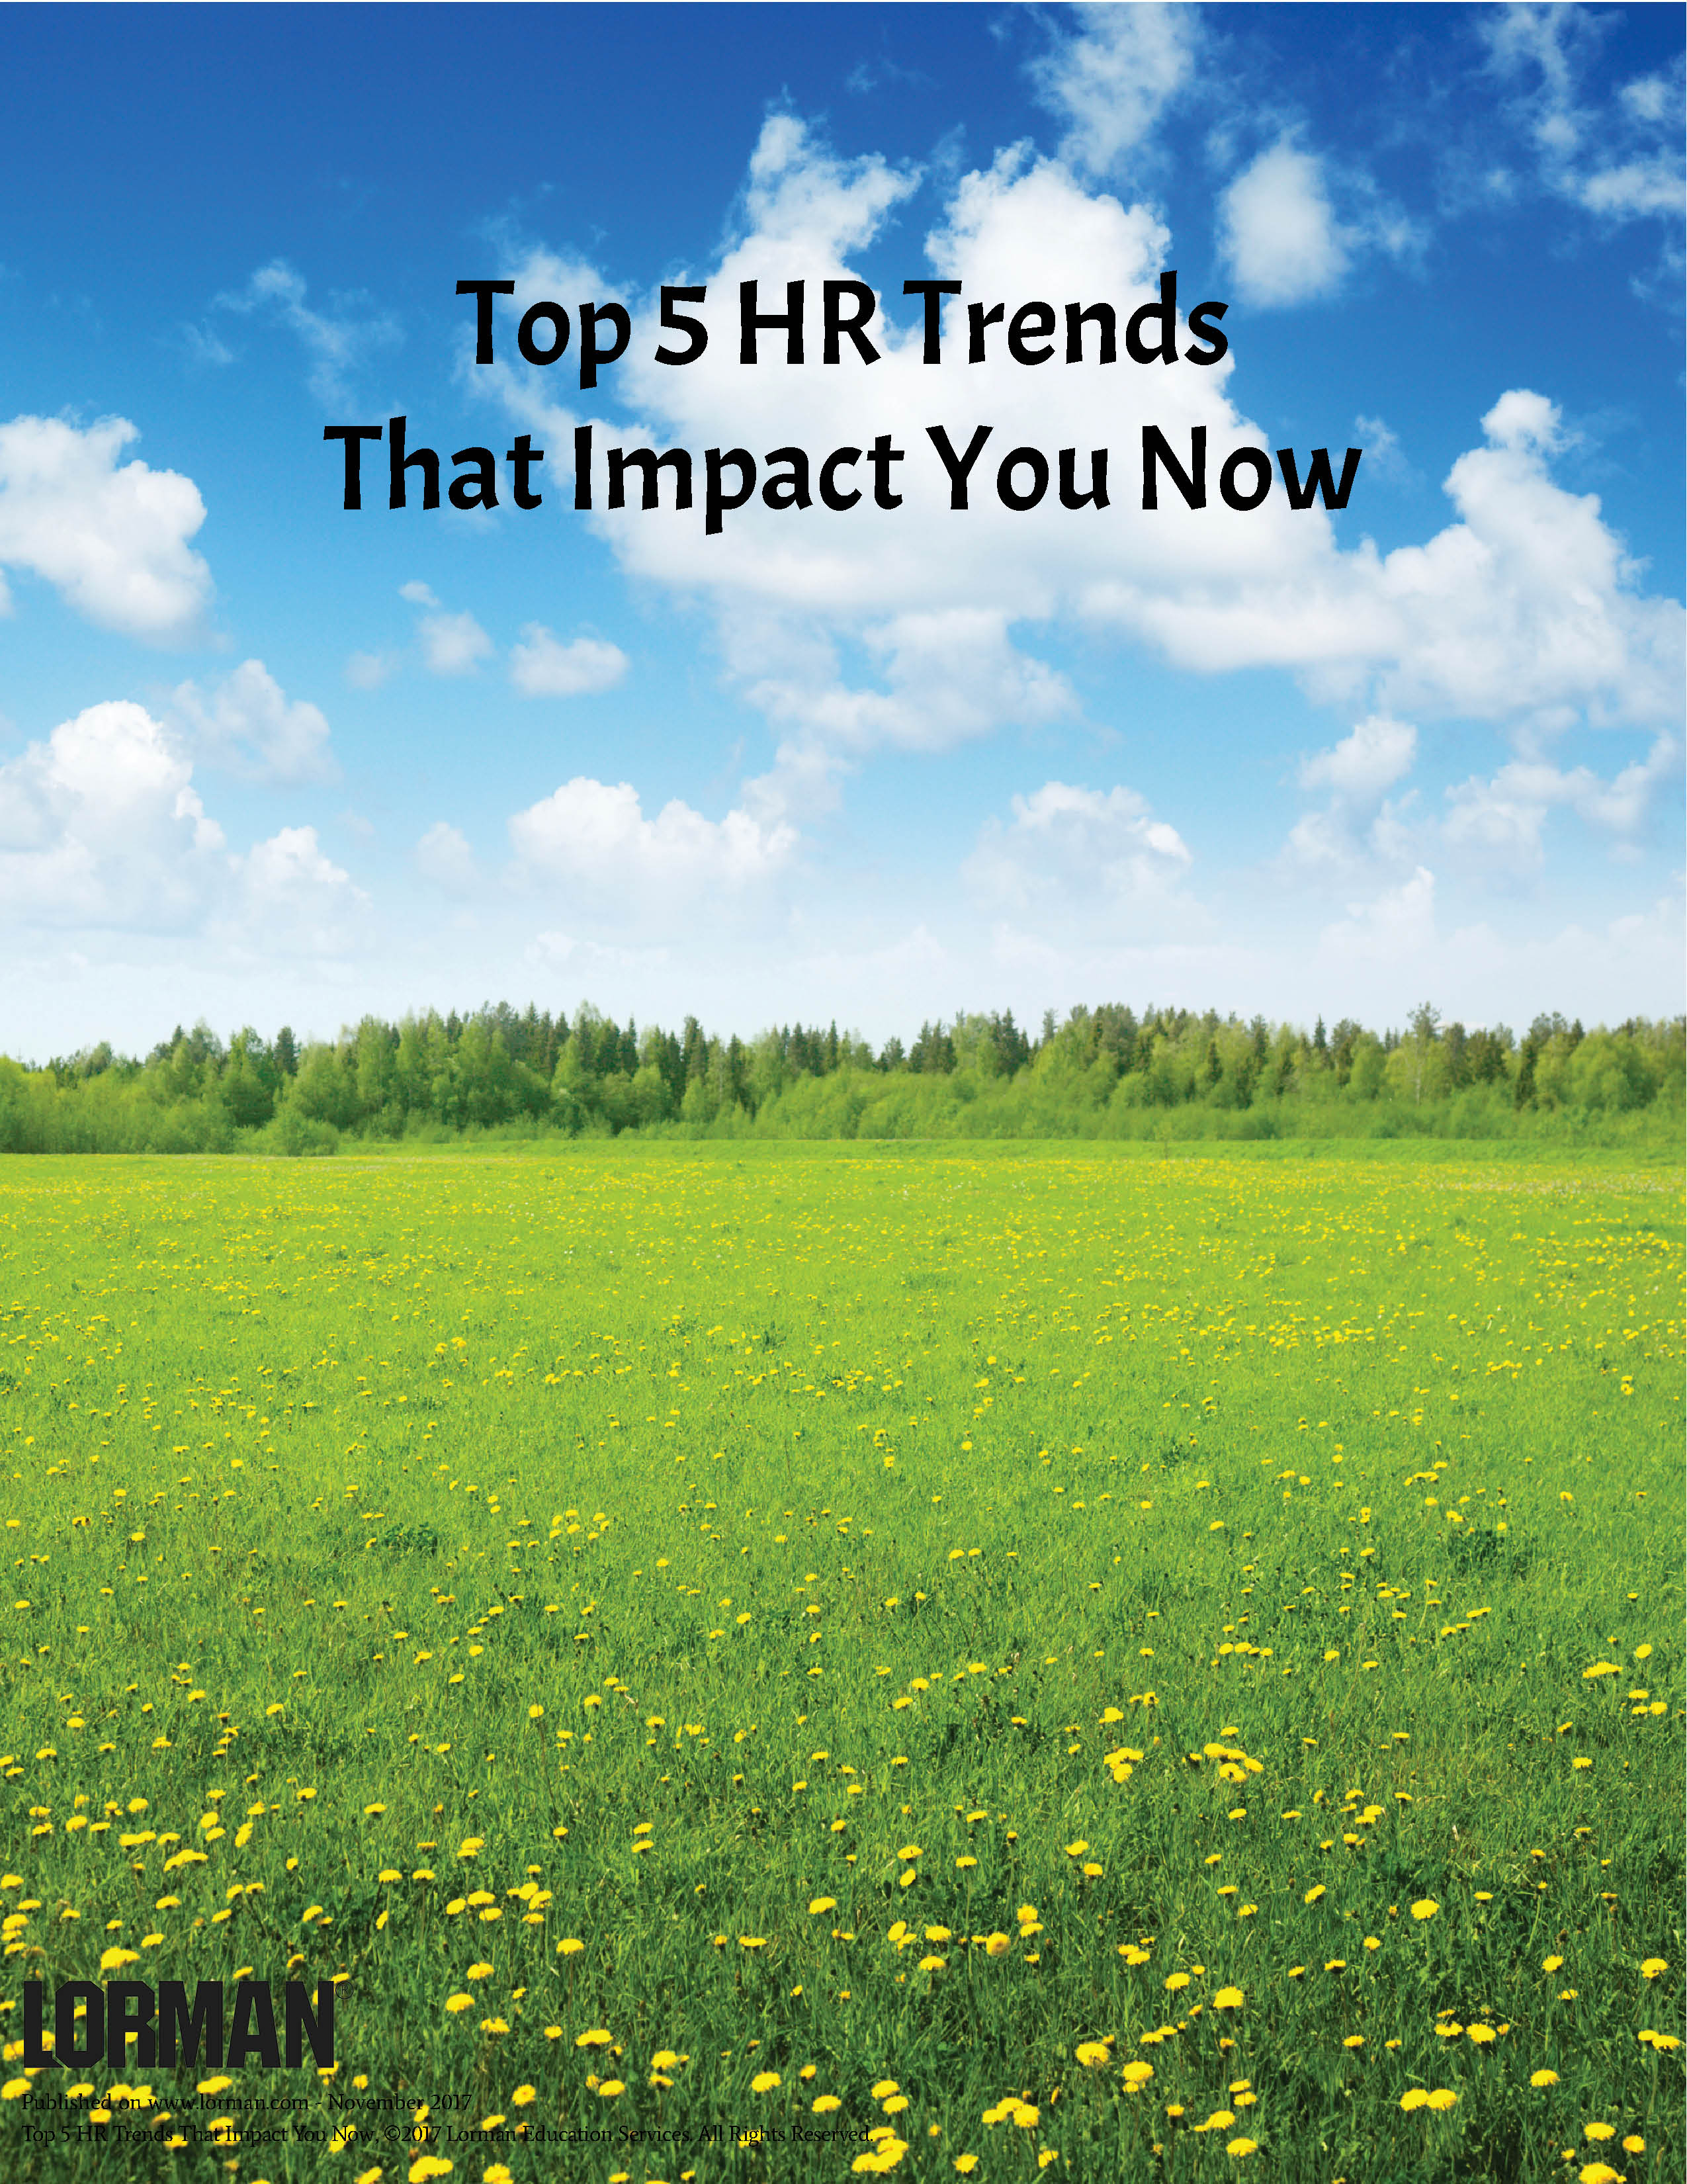 Top 5 HR Trends That Impact You Now